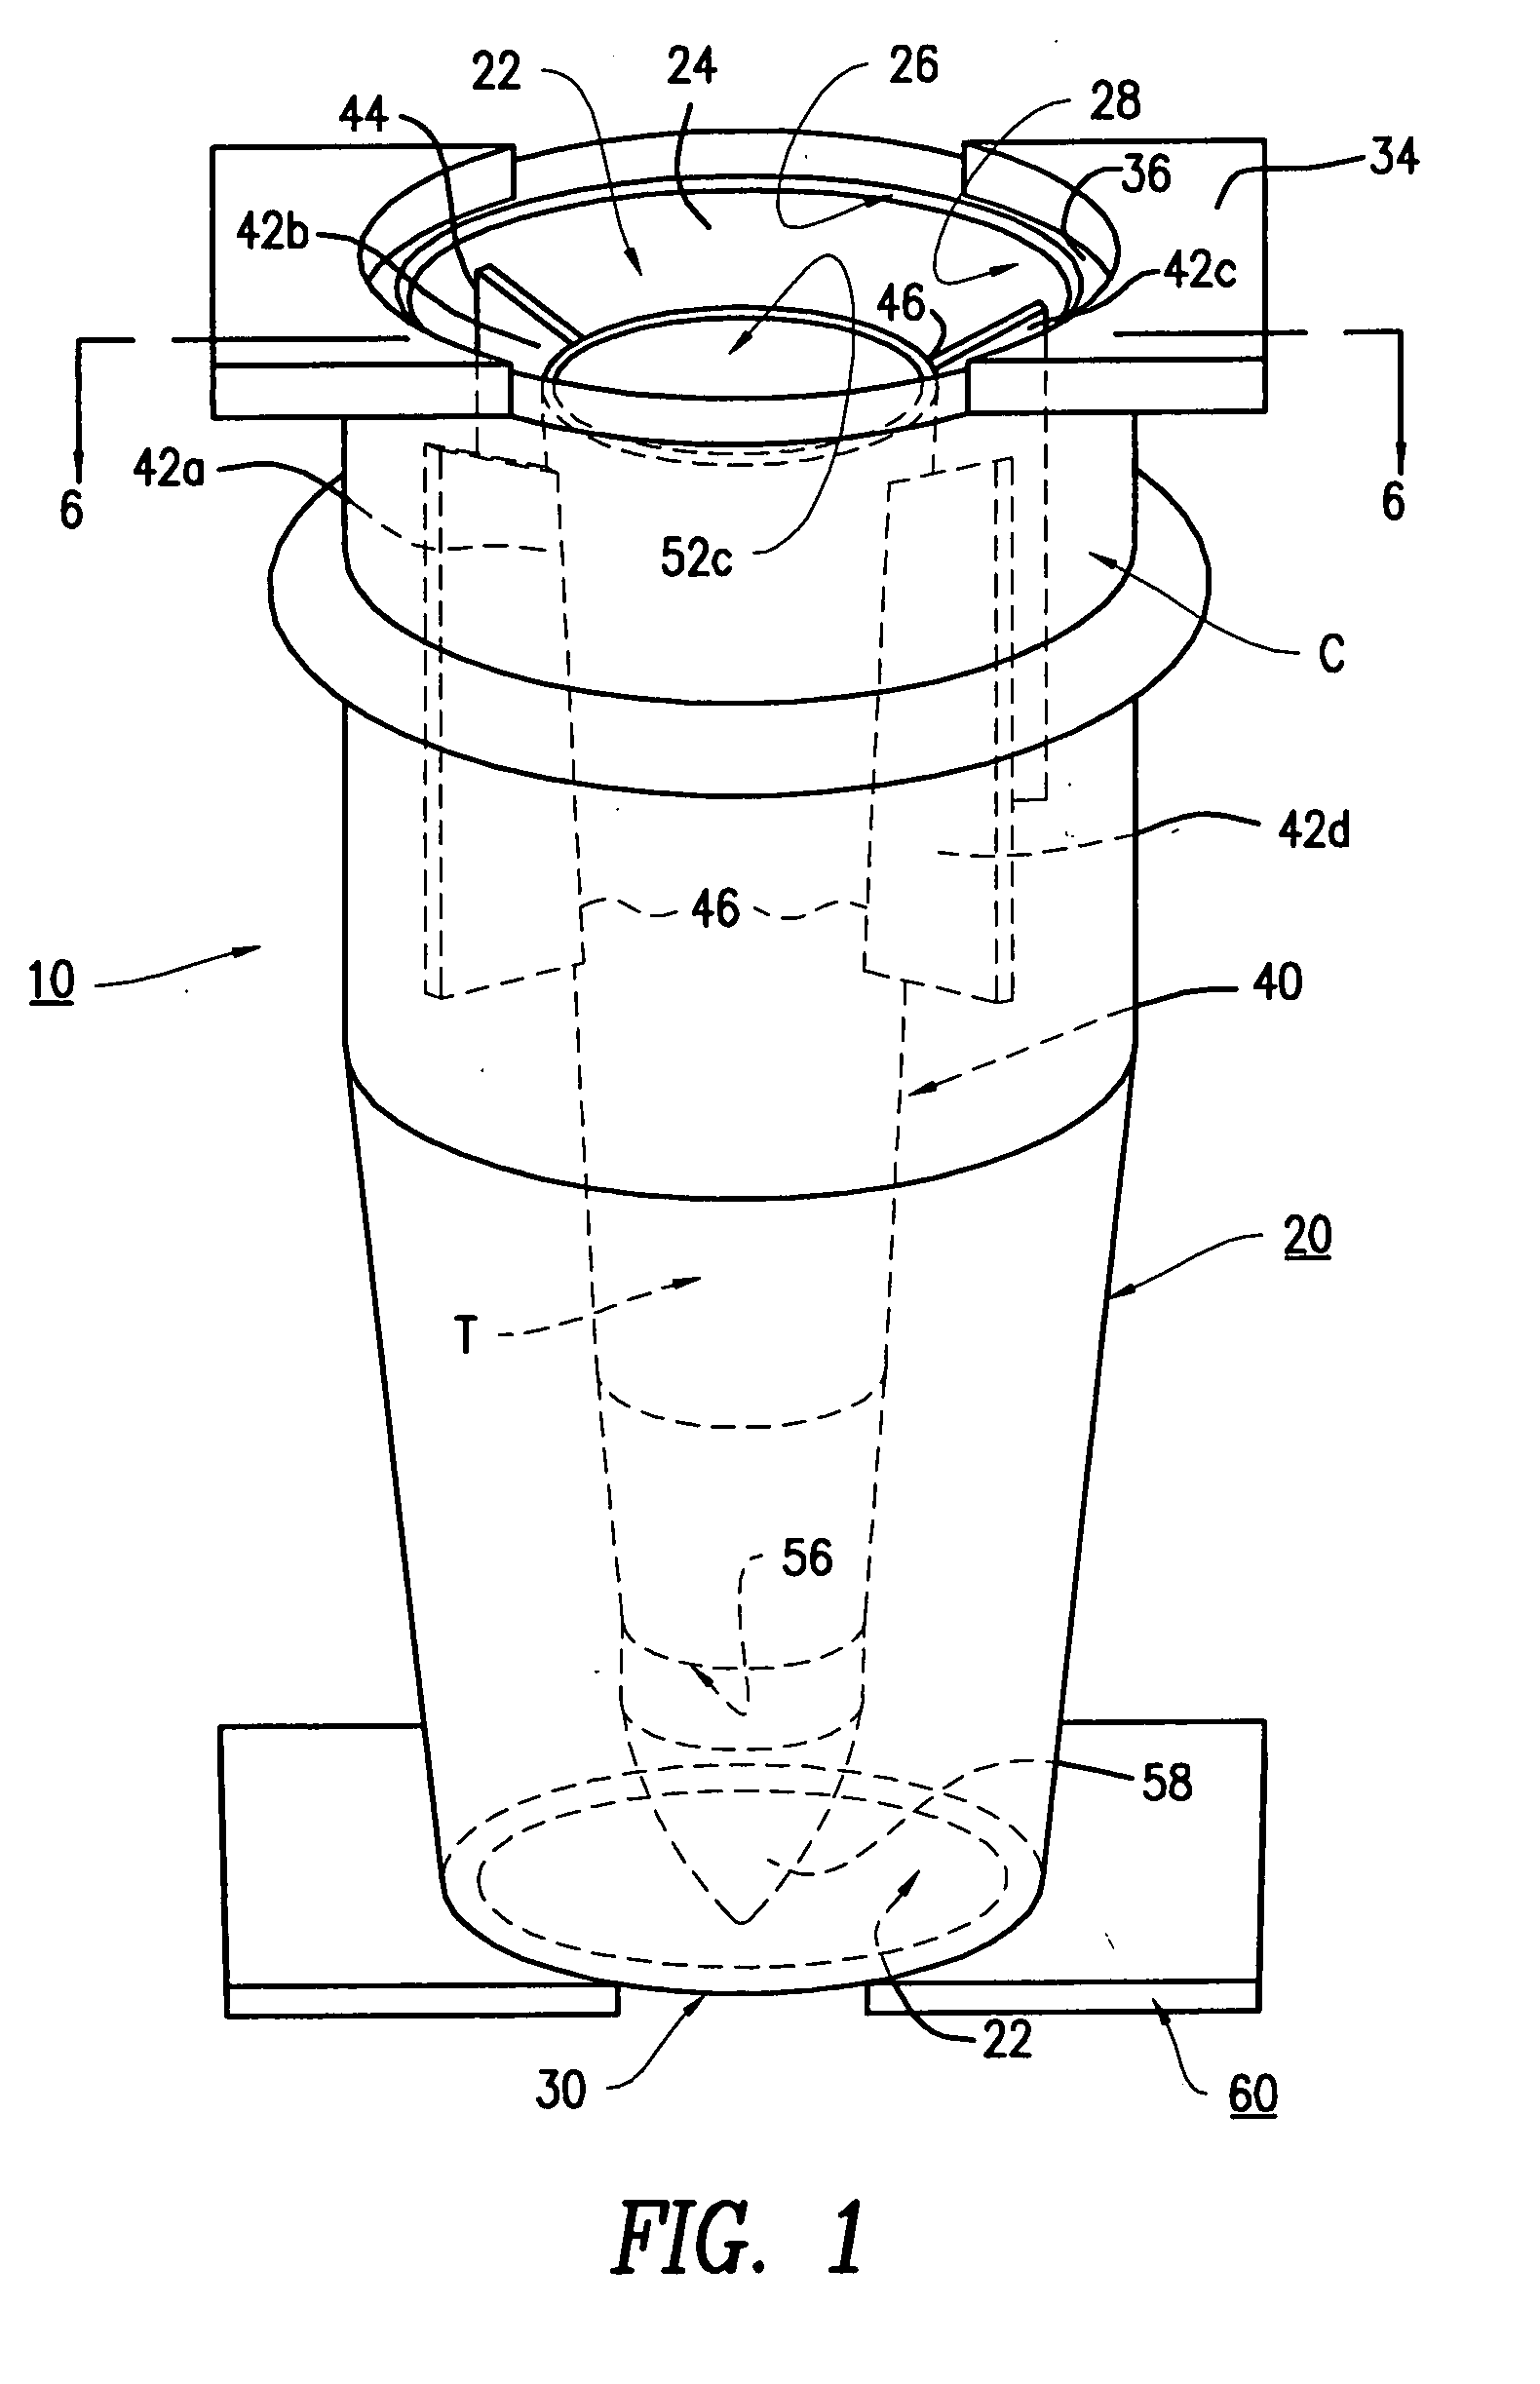 Ice cream and topping mixing attachment